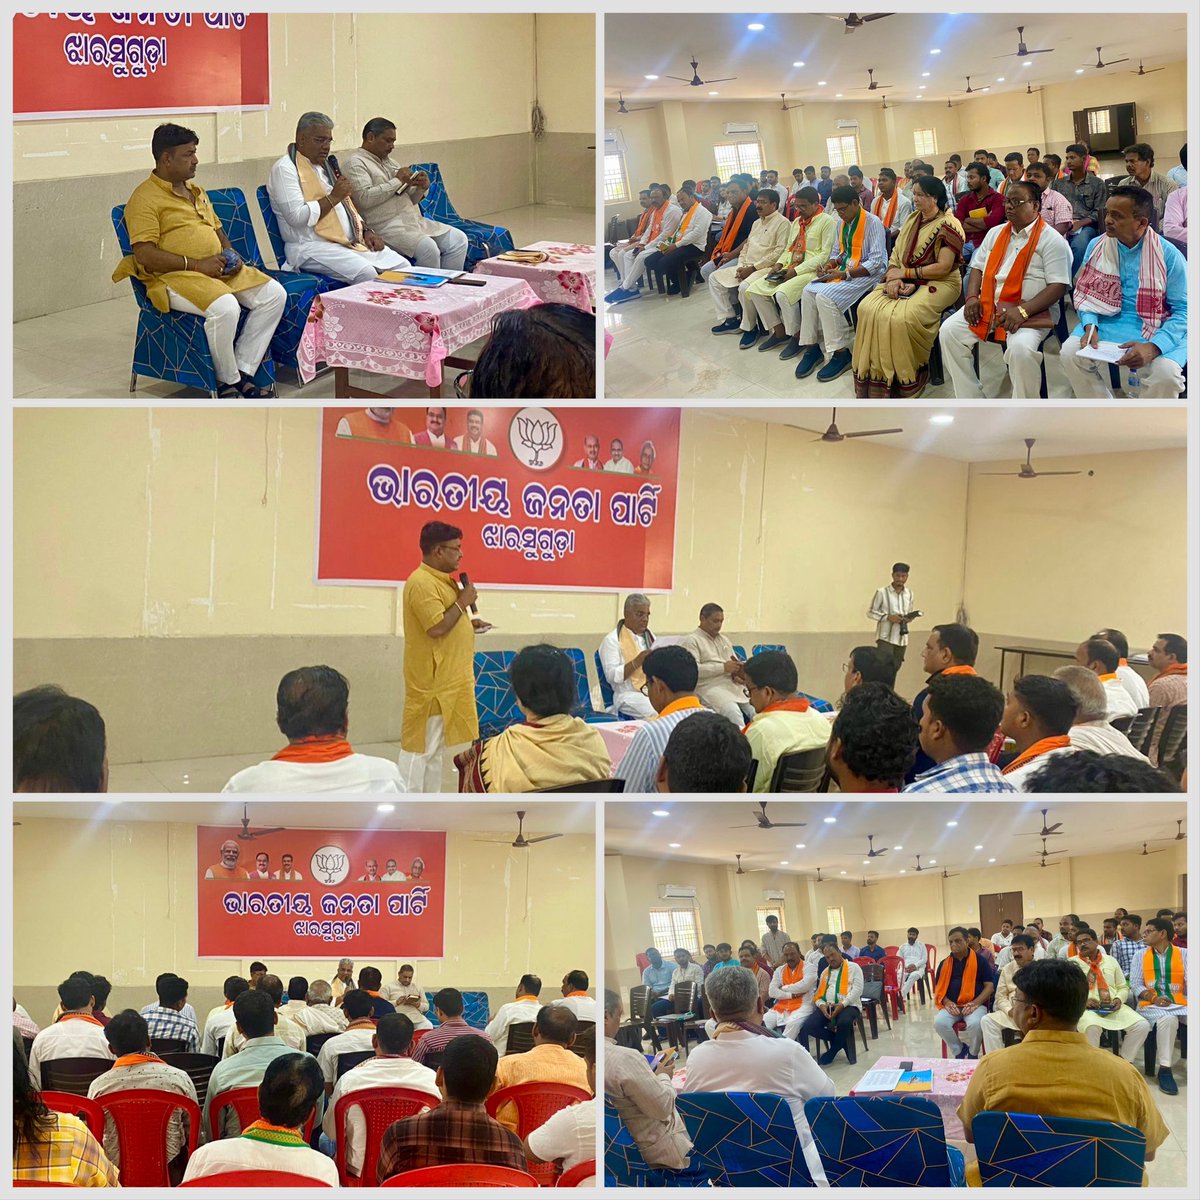 Held meetings with party office-bearers and karyakartas in Odisha's Baragarh, Sundargarh and Balangir. The @BJP4Odisha cadre is fully committed to ensuring the corrupt government of BJD is voted out and all 21 Lok Sabha candidates of the BJP win with huge majorities.